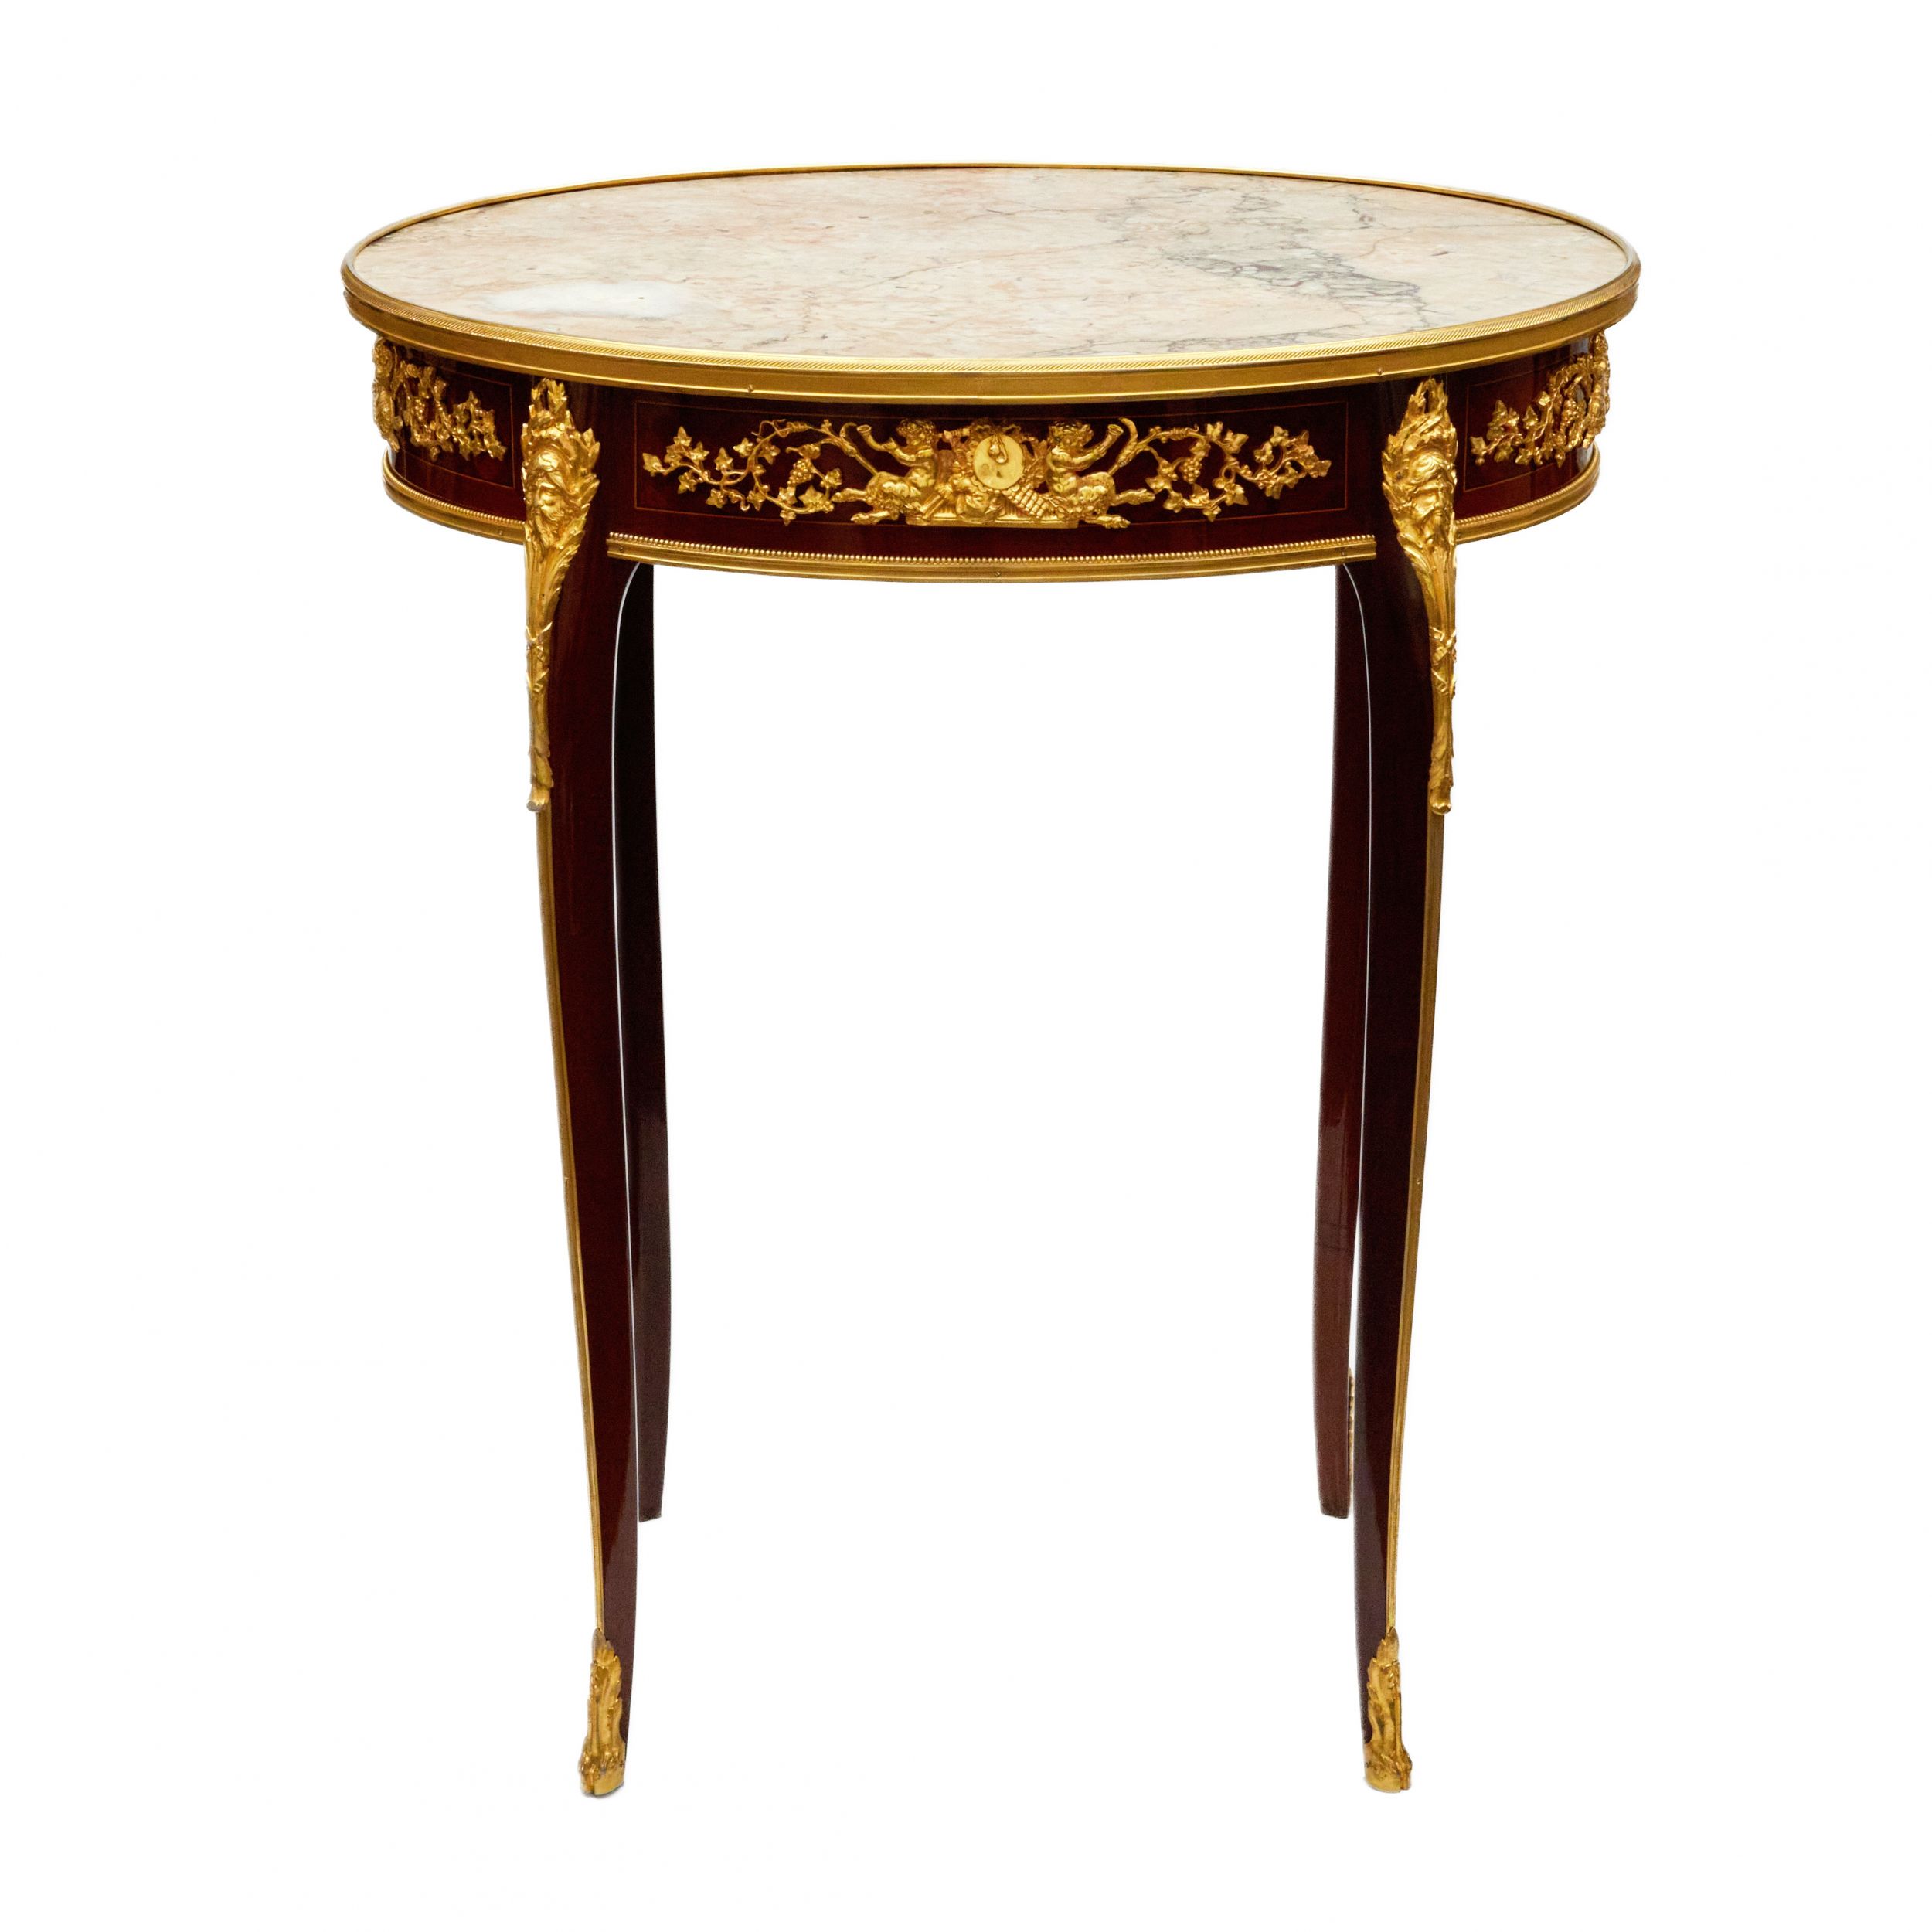 Magnificent-mahogany-and-gilded-bronze-table-by-François-Linke-